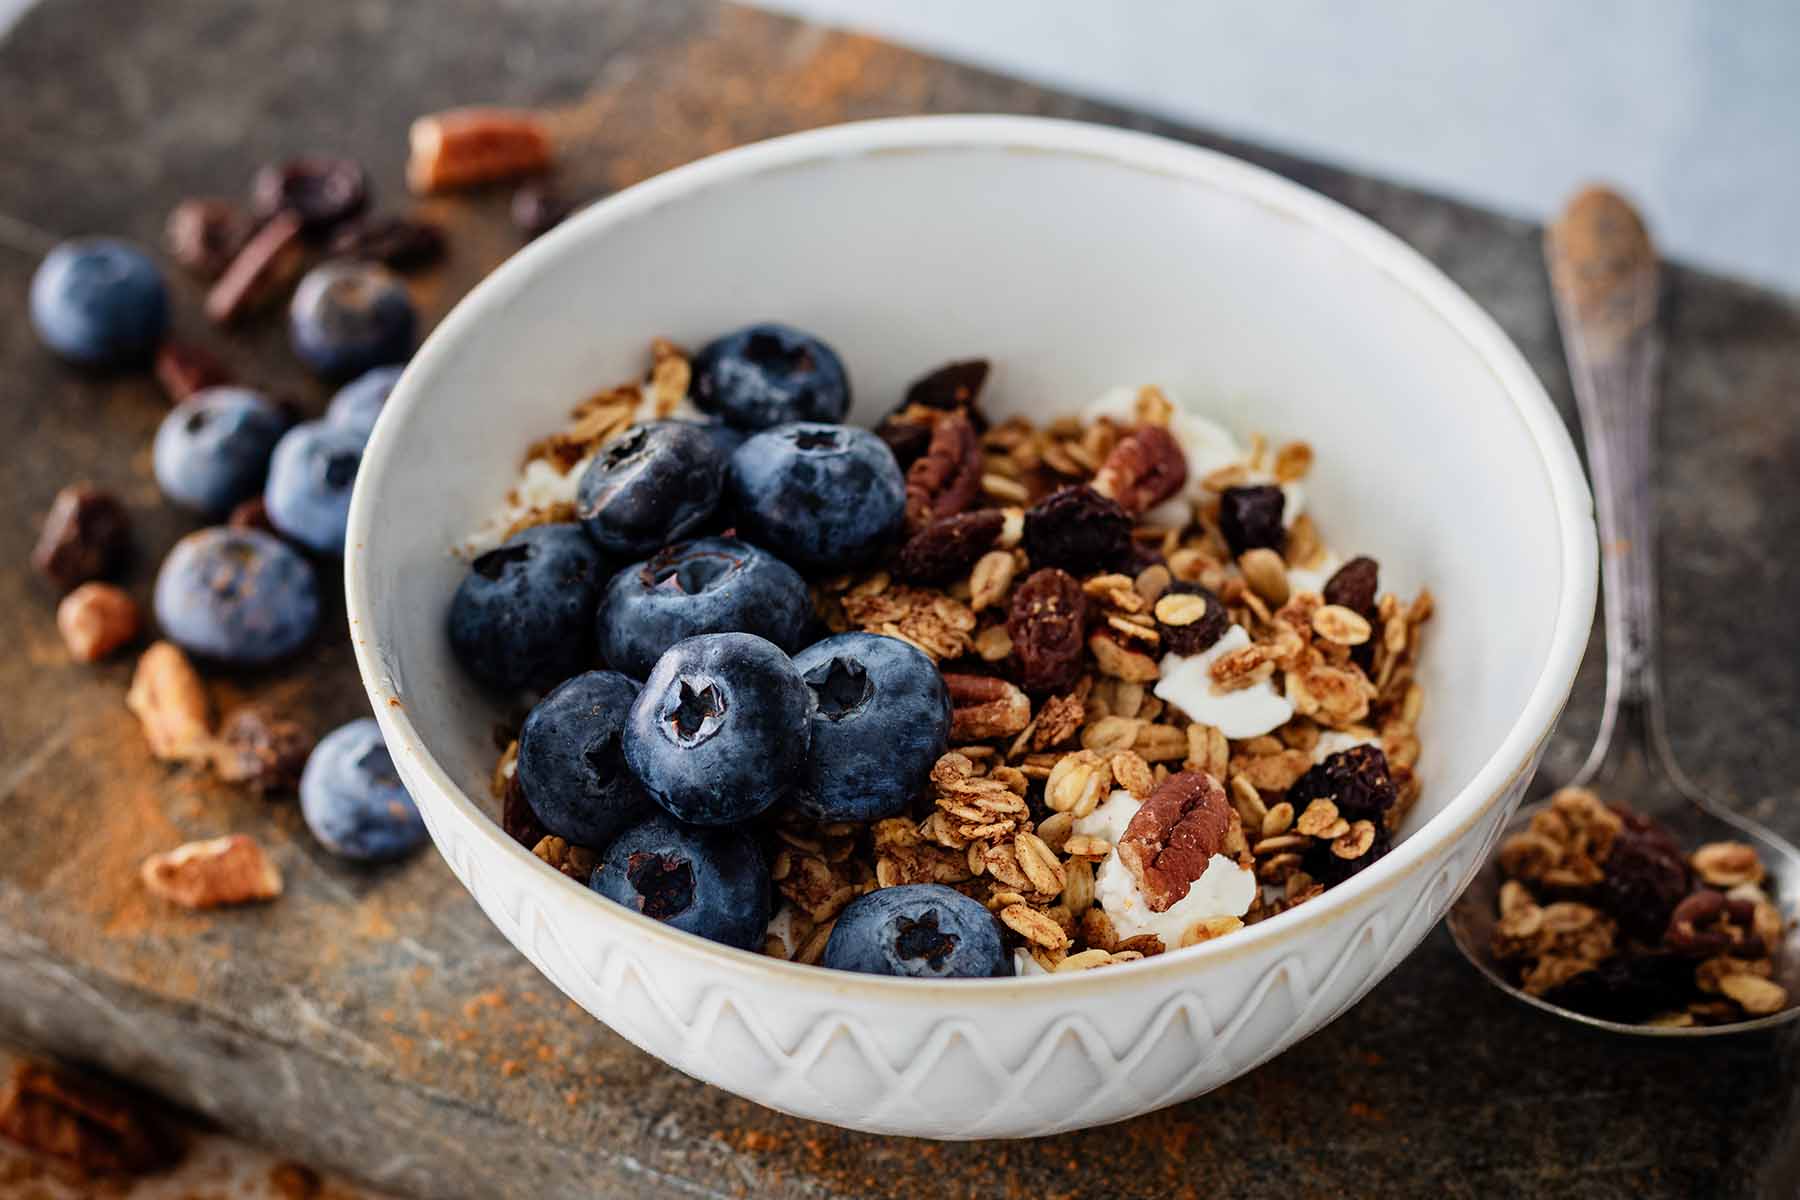 Cinnamon granola in a white ceramic bowl with fresh blueberries and a soup spoon with granola.